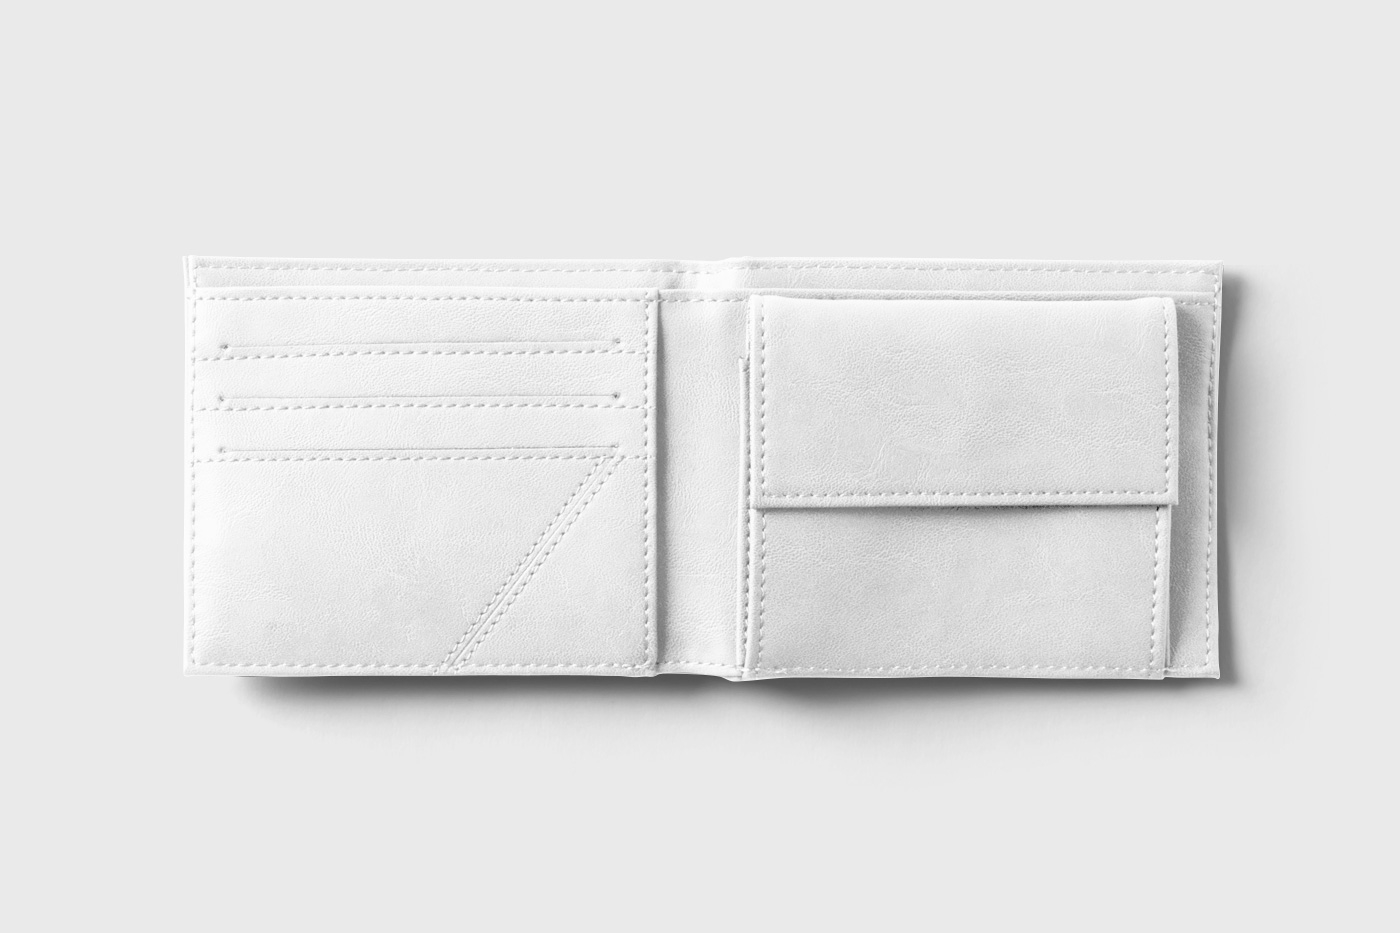 Top View of an Open Leather Wallet Mockup FREE PSD